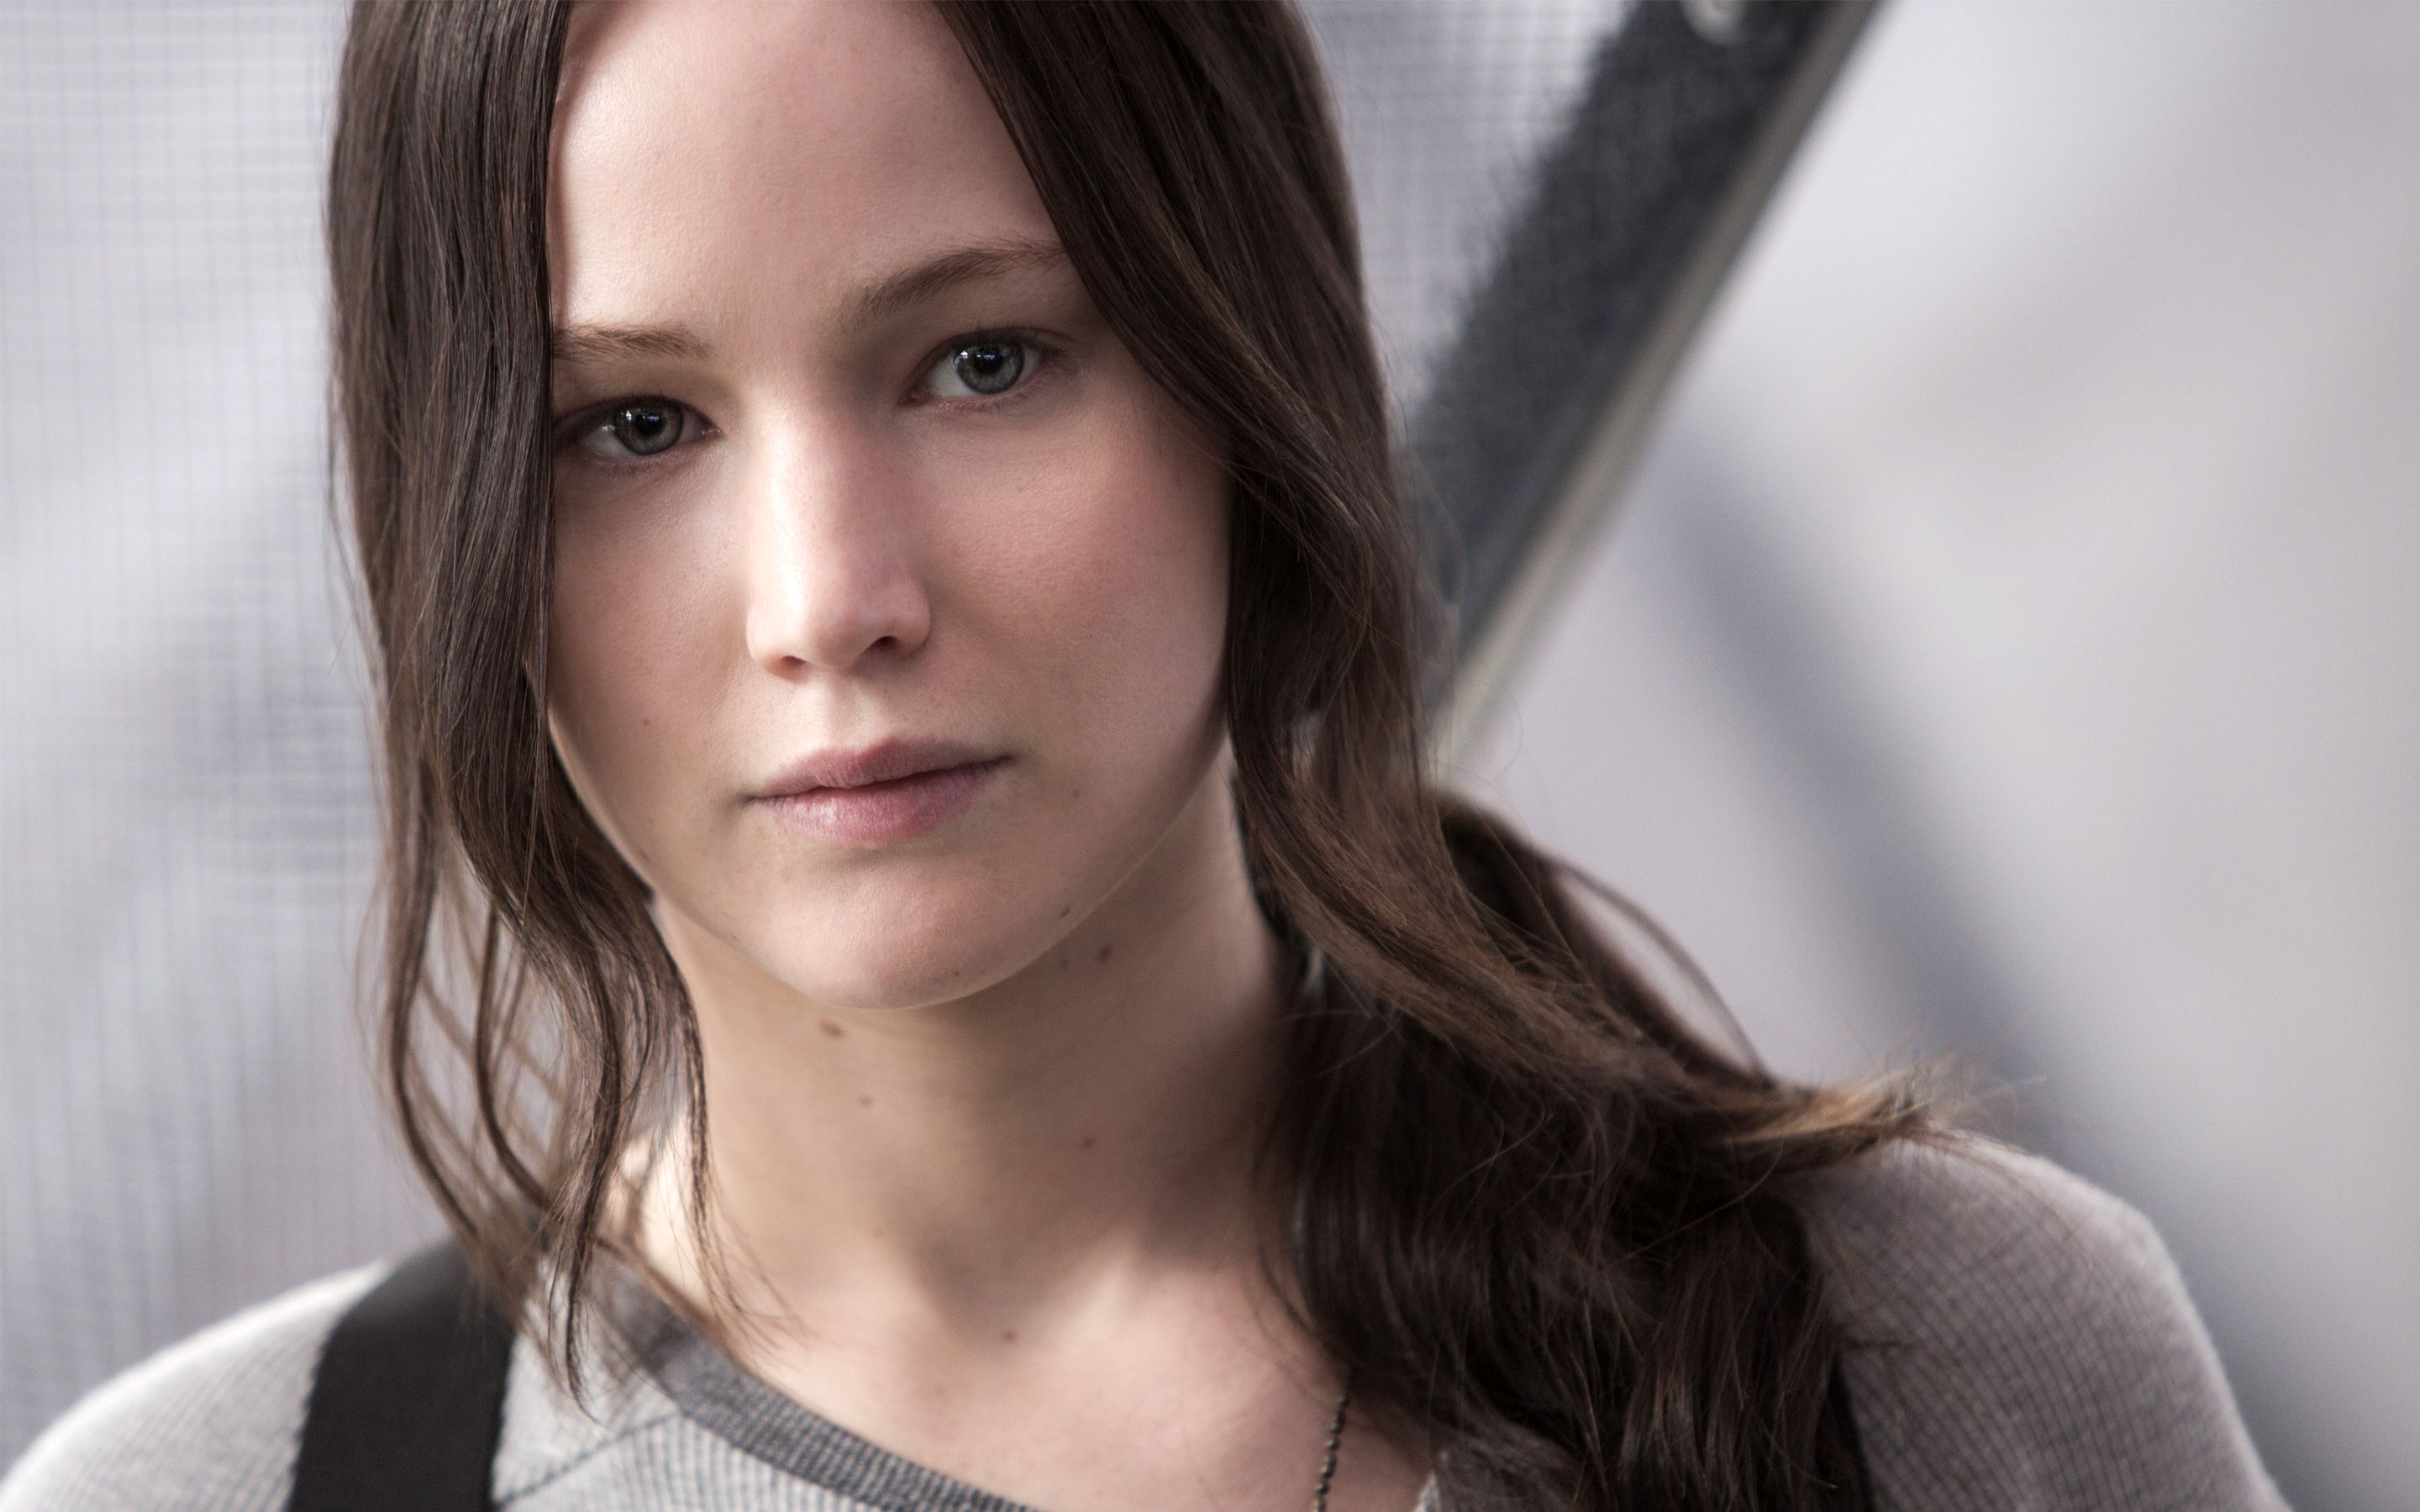 Jennifer Lawrence as Katniss Everdeen in The Hunger Games: Mockingjay Part 1. She's wearing a grey shirt and has a serious expression on her face. She's looking at the camera. - Jennifer Lawrence